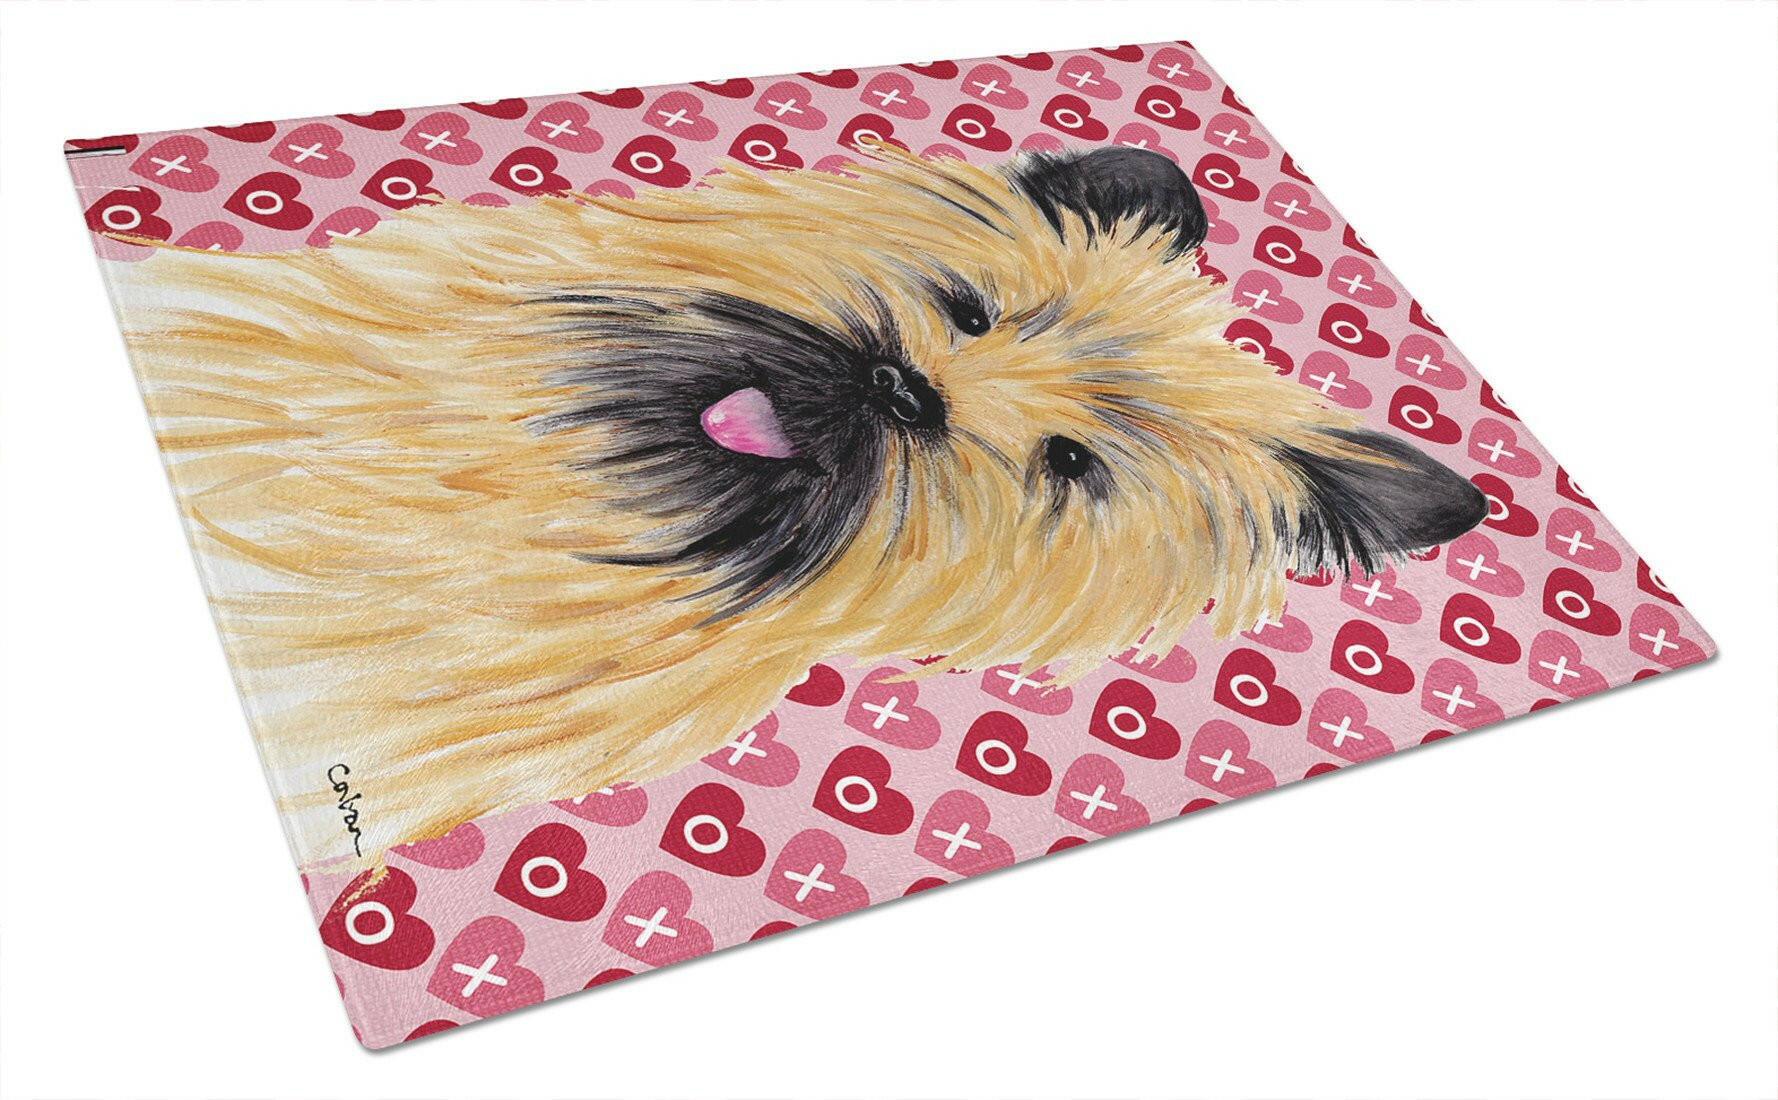 Cairn Terrier Hearts Love and Valentine's Day Glass Cutting Board Large by Caroline's Treasures